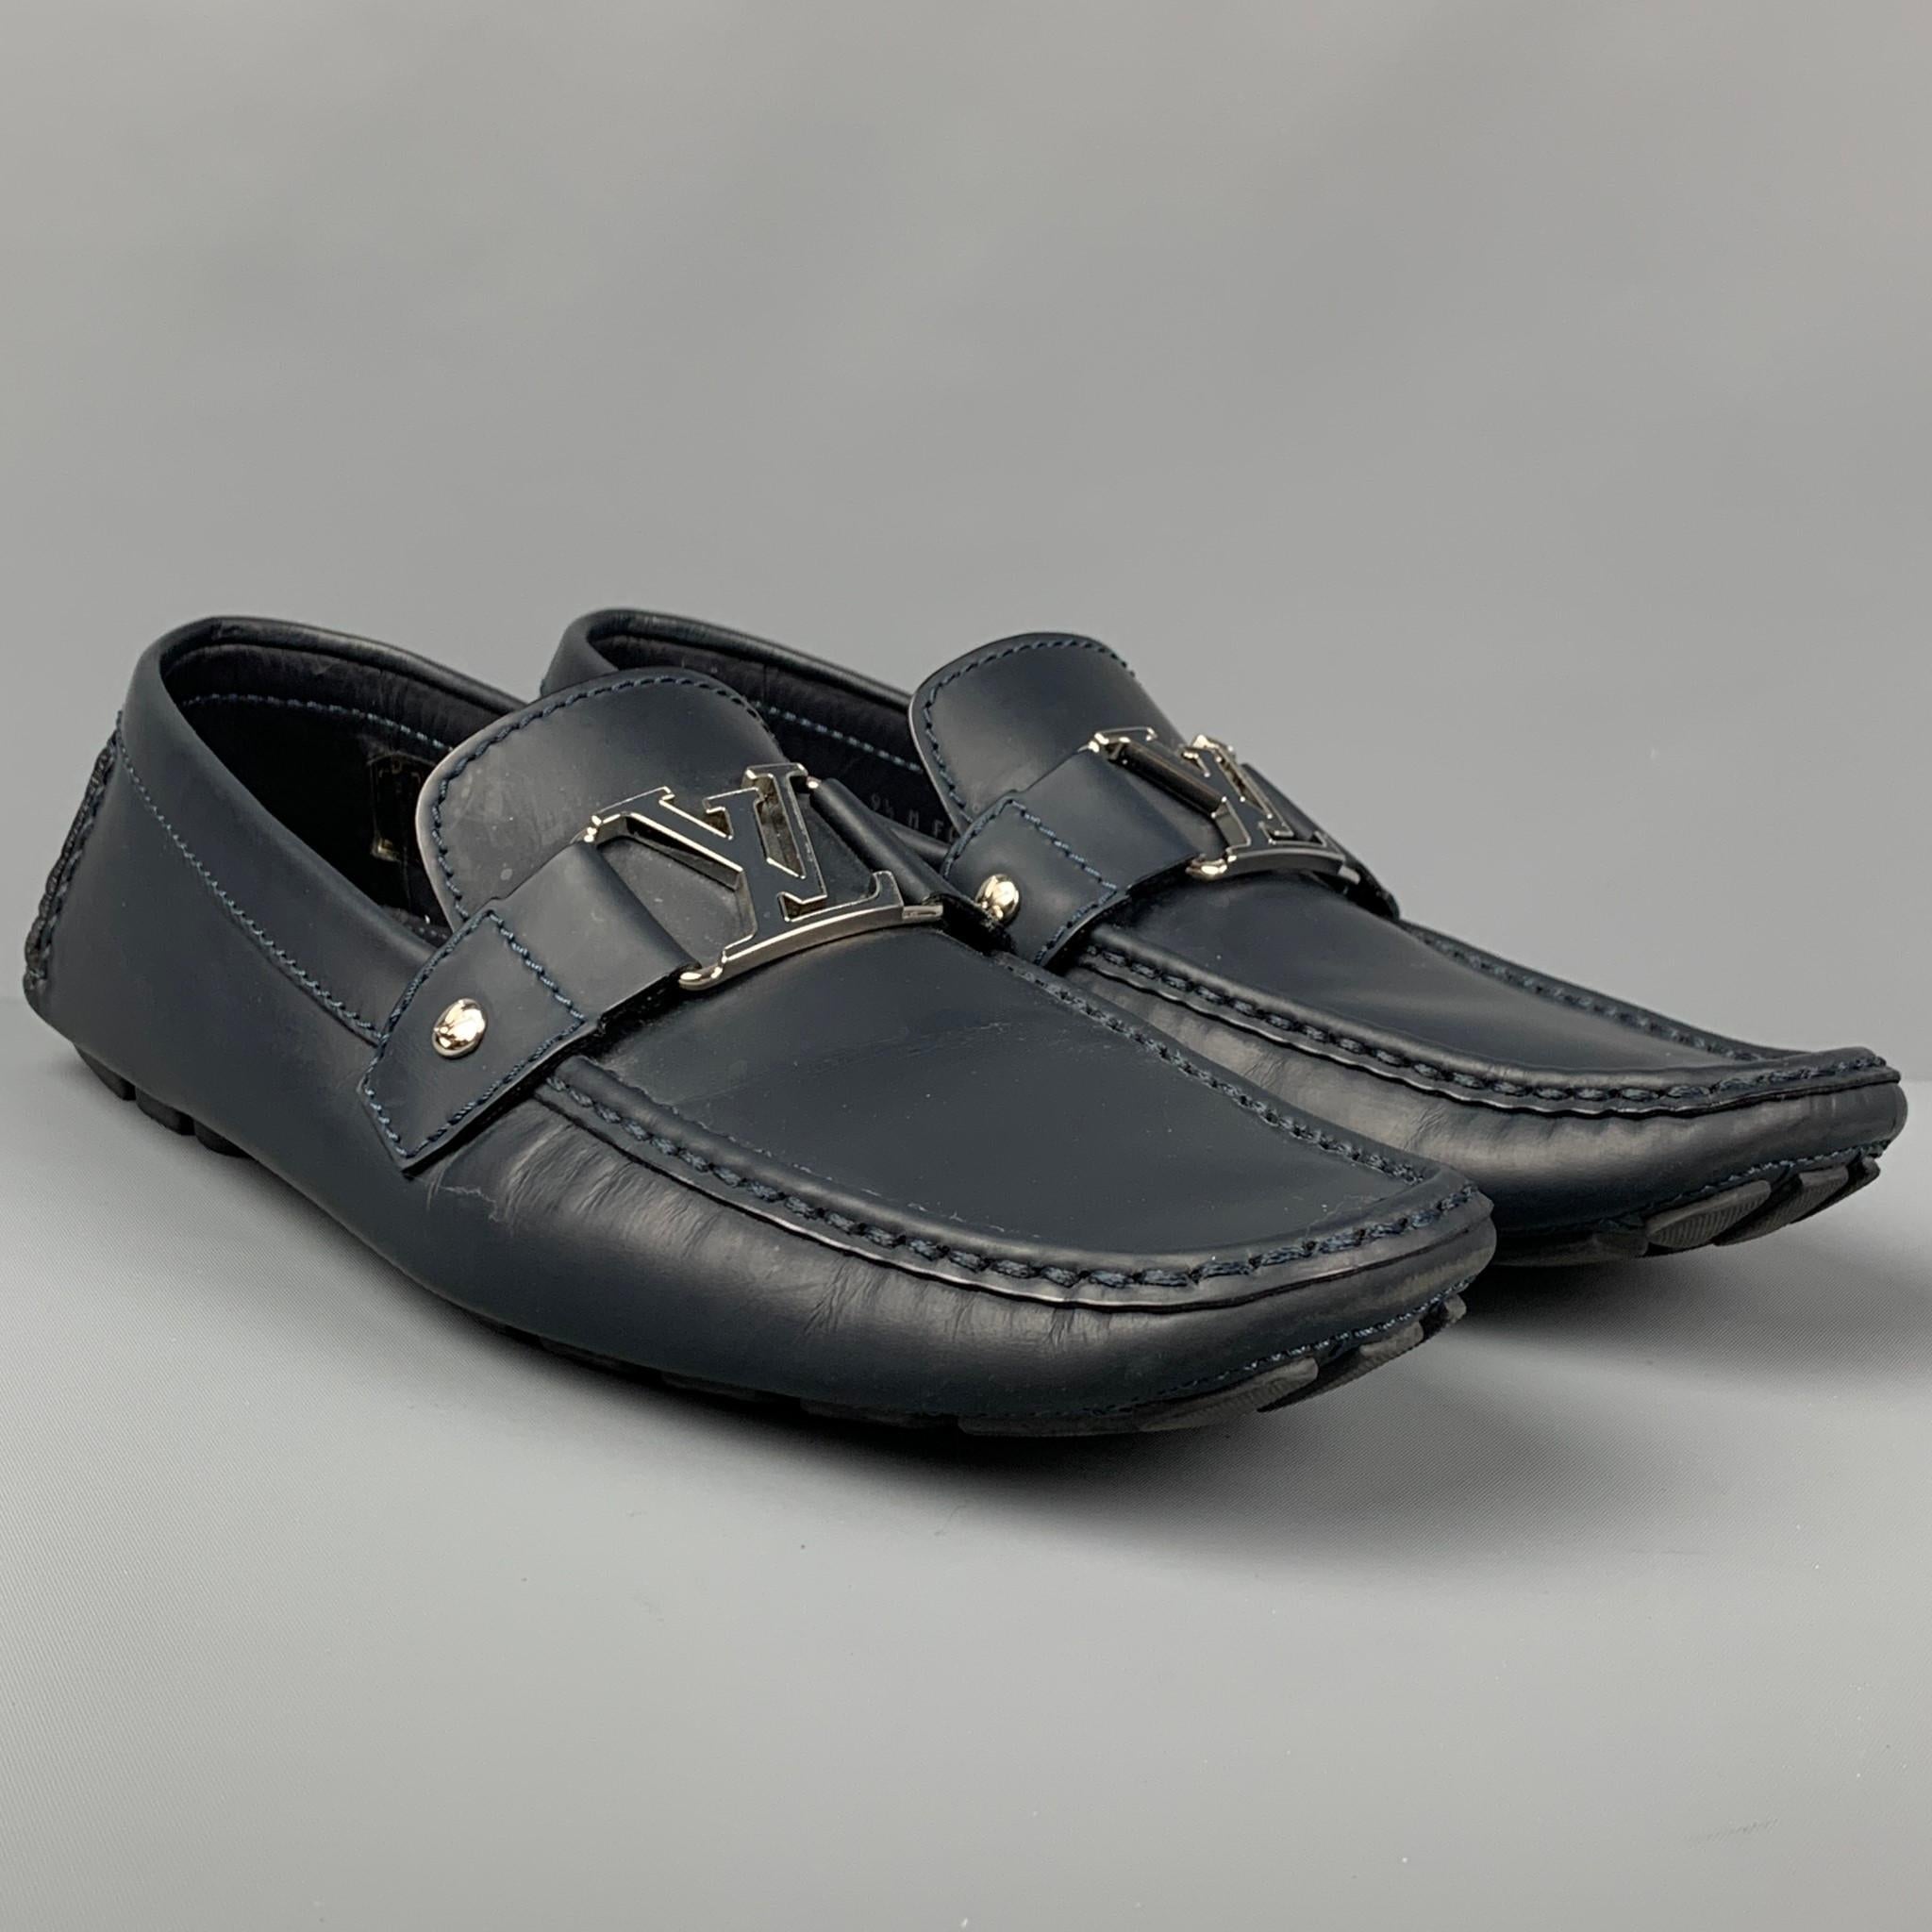 LOUIS VUITTON loafers comes in a navy leather featuring a front 'LV' silver tone metal design, slip on, and a drivers sole. Made in Italy. 

Very Good Pre-Owned Condition.
Marked: 9.5 M FA 0174

Outsole: 12 in. x 4 in. 